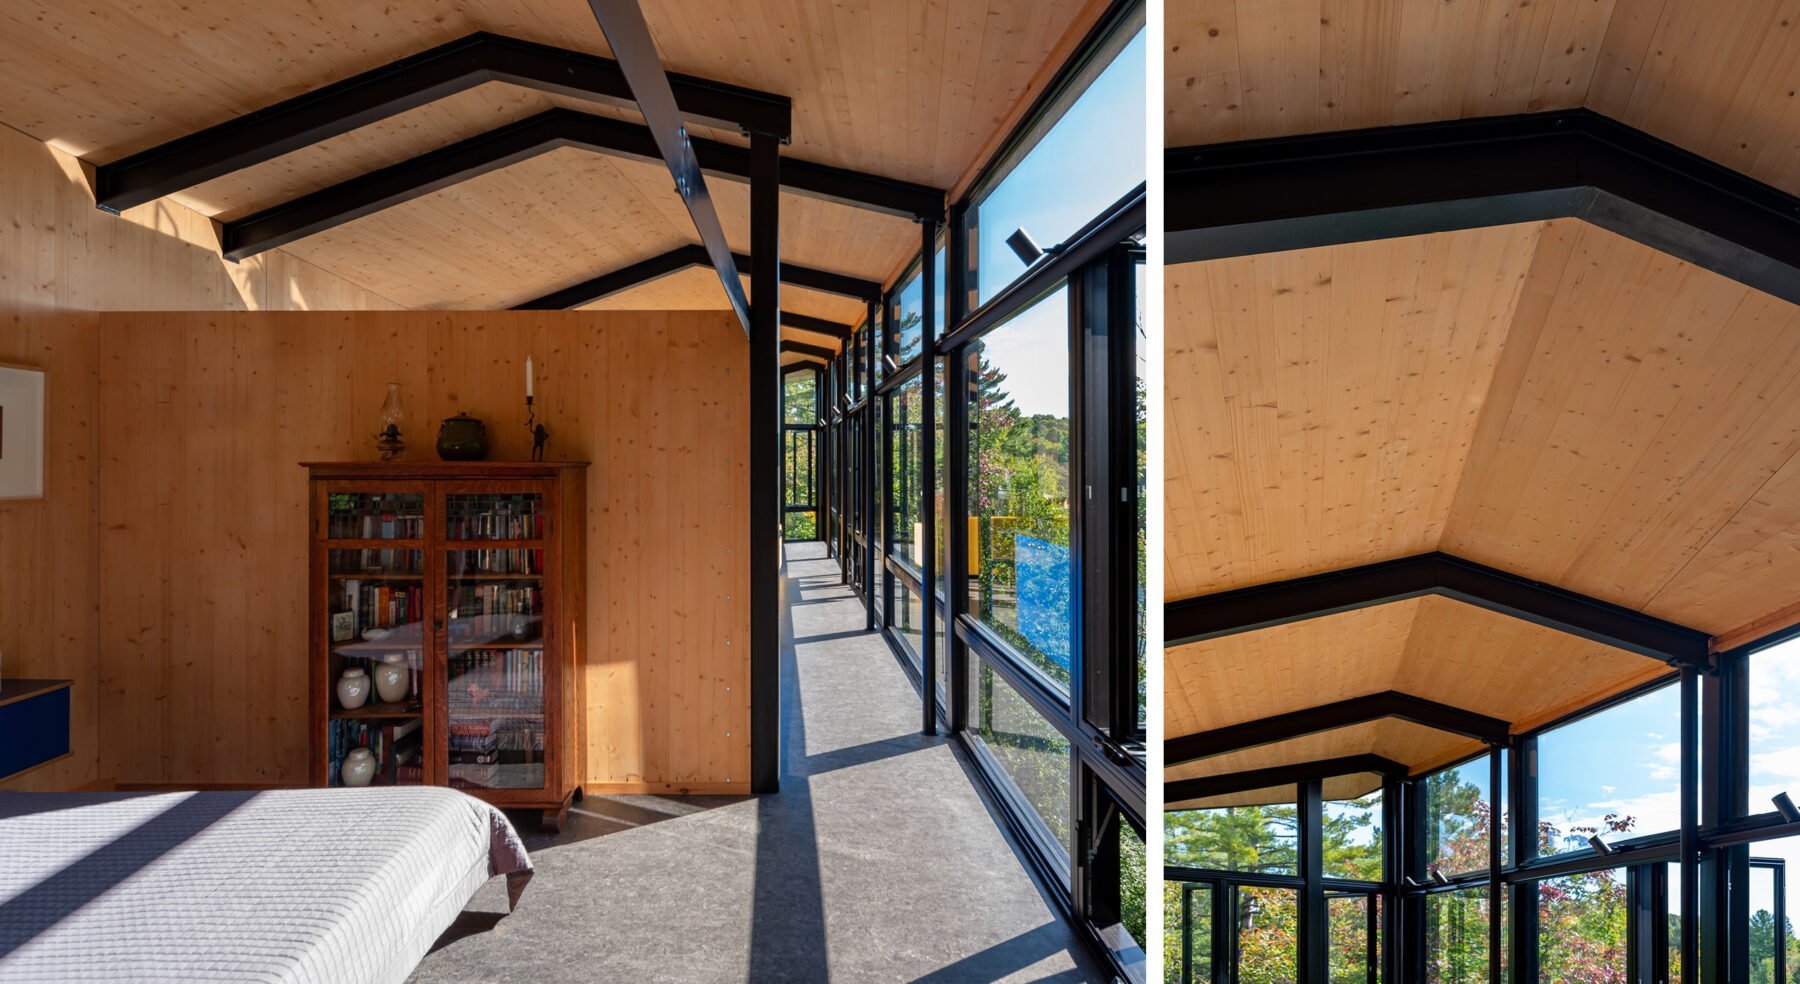 m.o.r.e. cabin interior - wooden beams and steel foundation